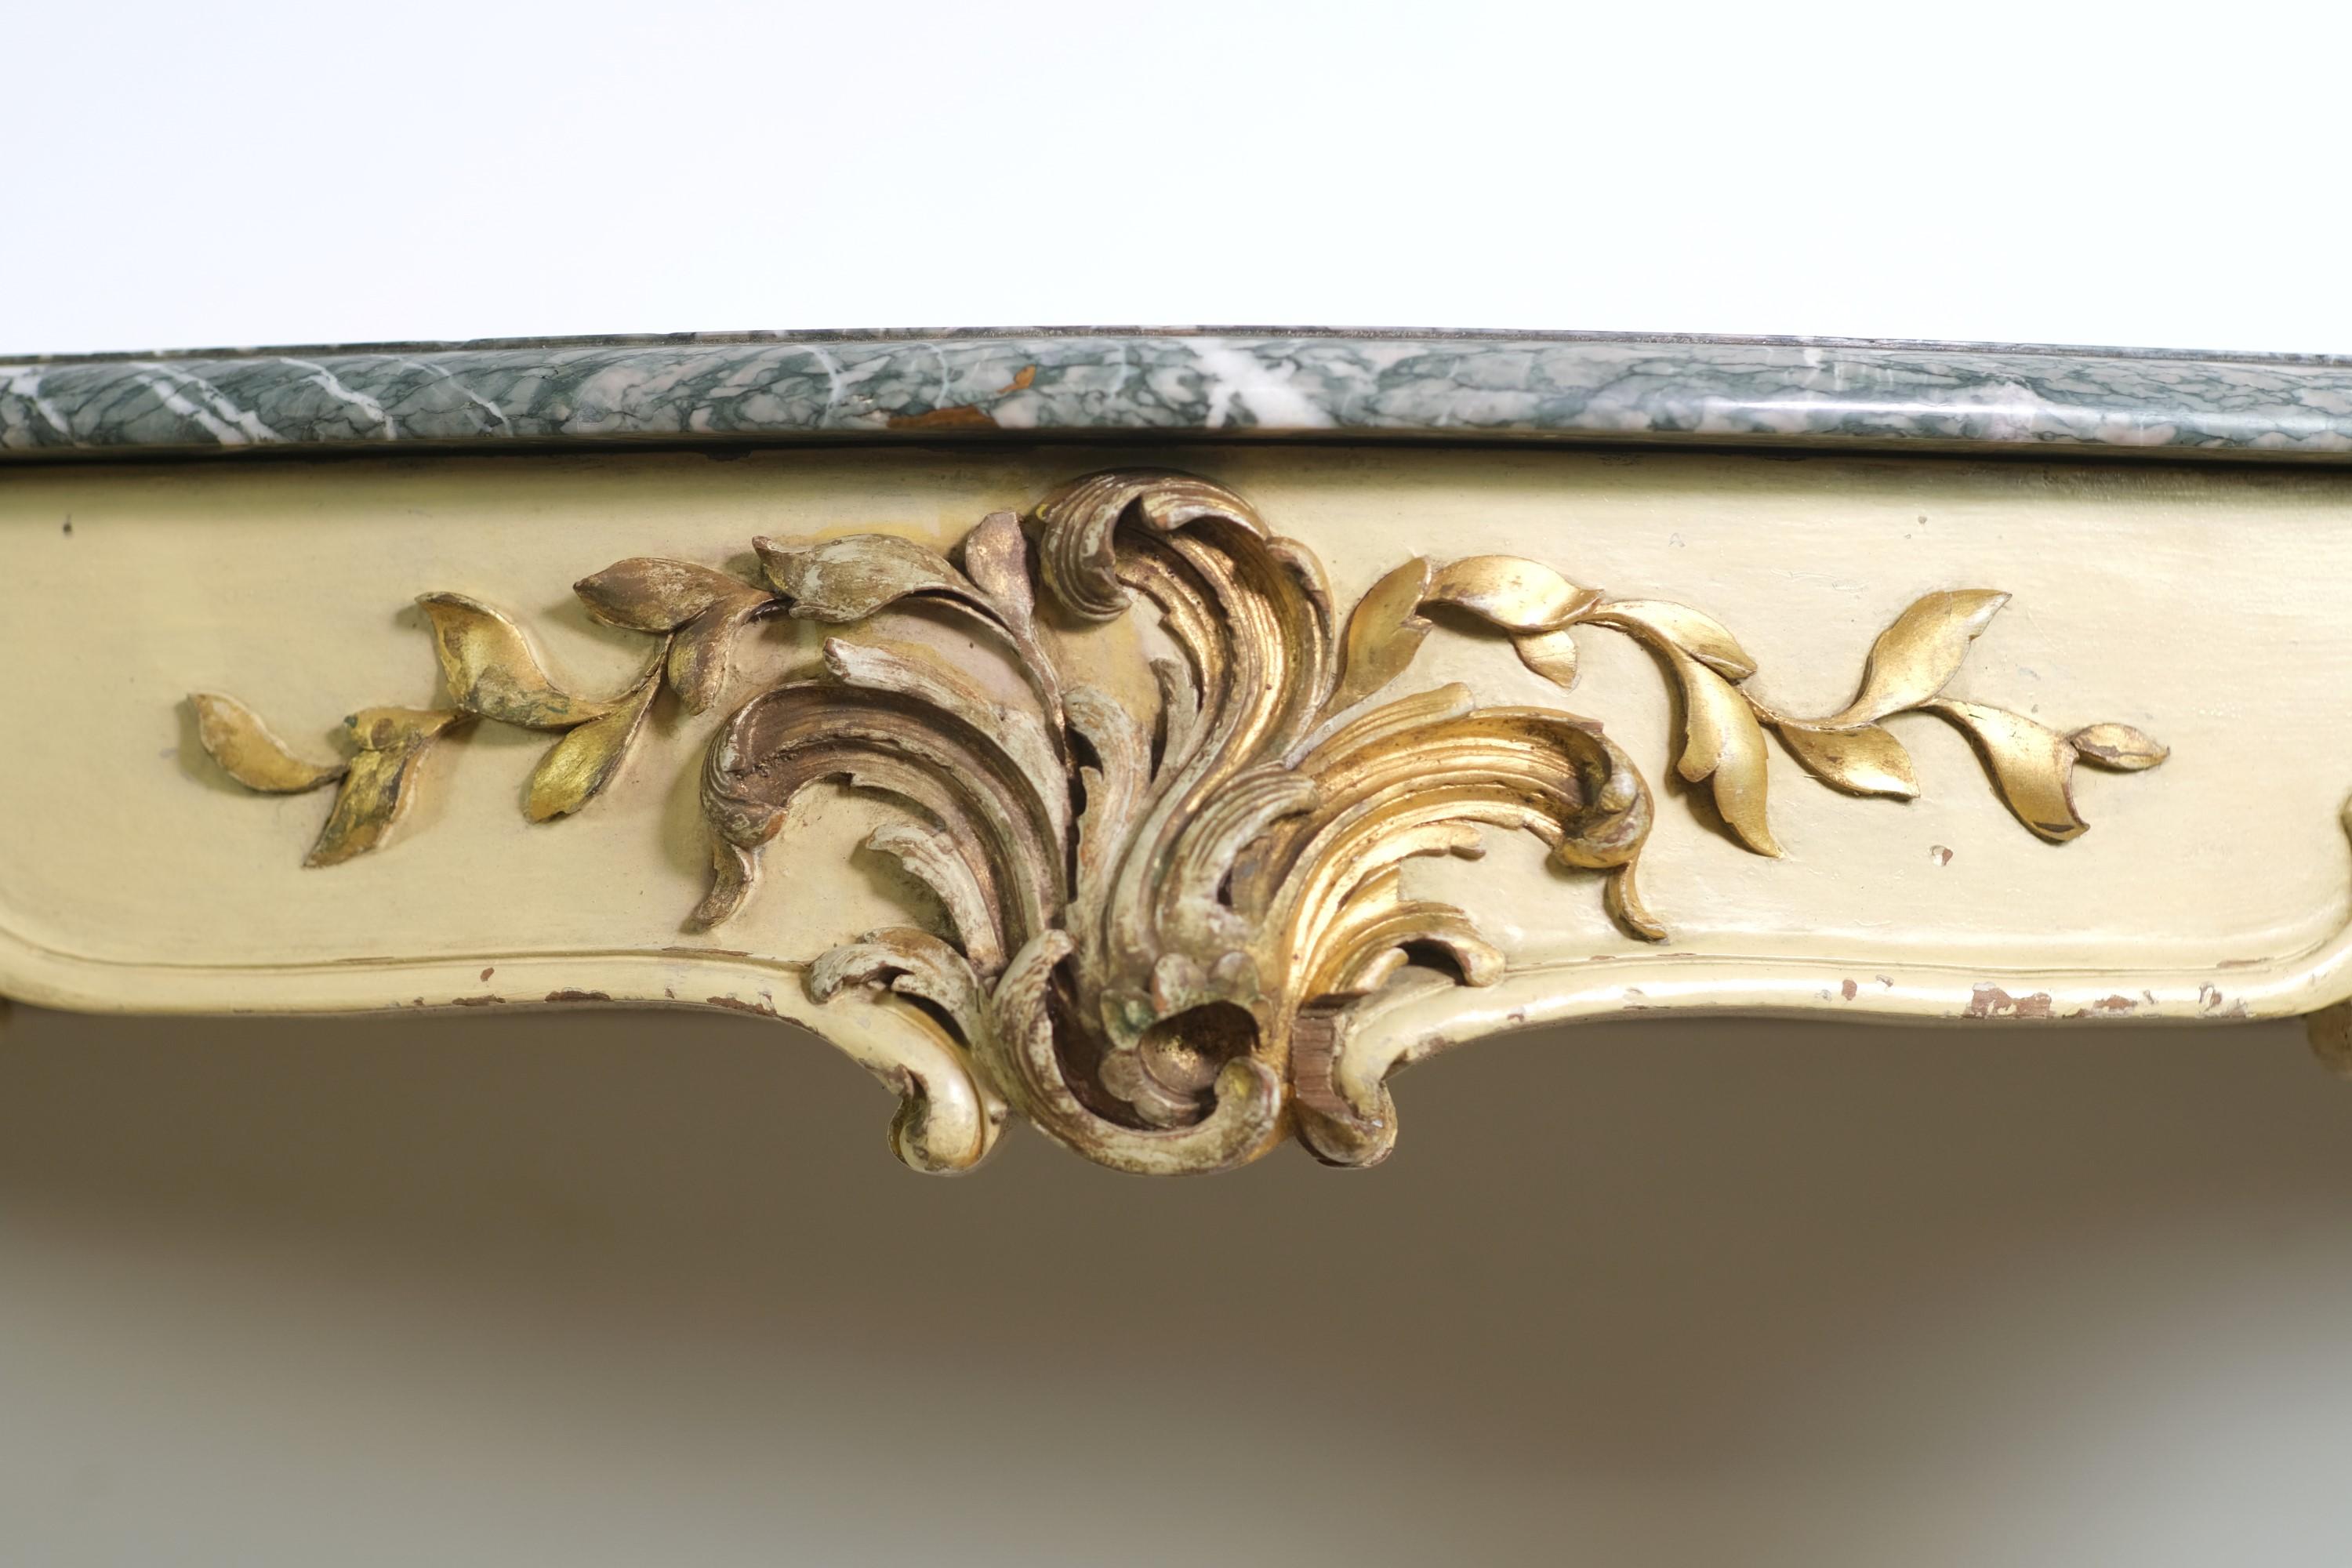 Rococo carved dark green marble top console table with gray and white veining and a carved cream and gold painted wooden base. 

Highly ornate Italian Rococo console table. The cream colored base is accented by hand carved gold painted floral